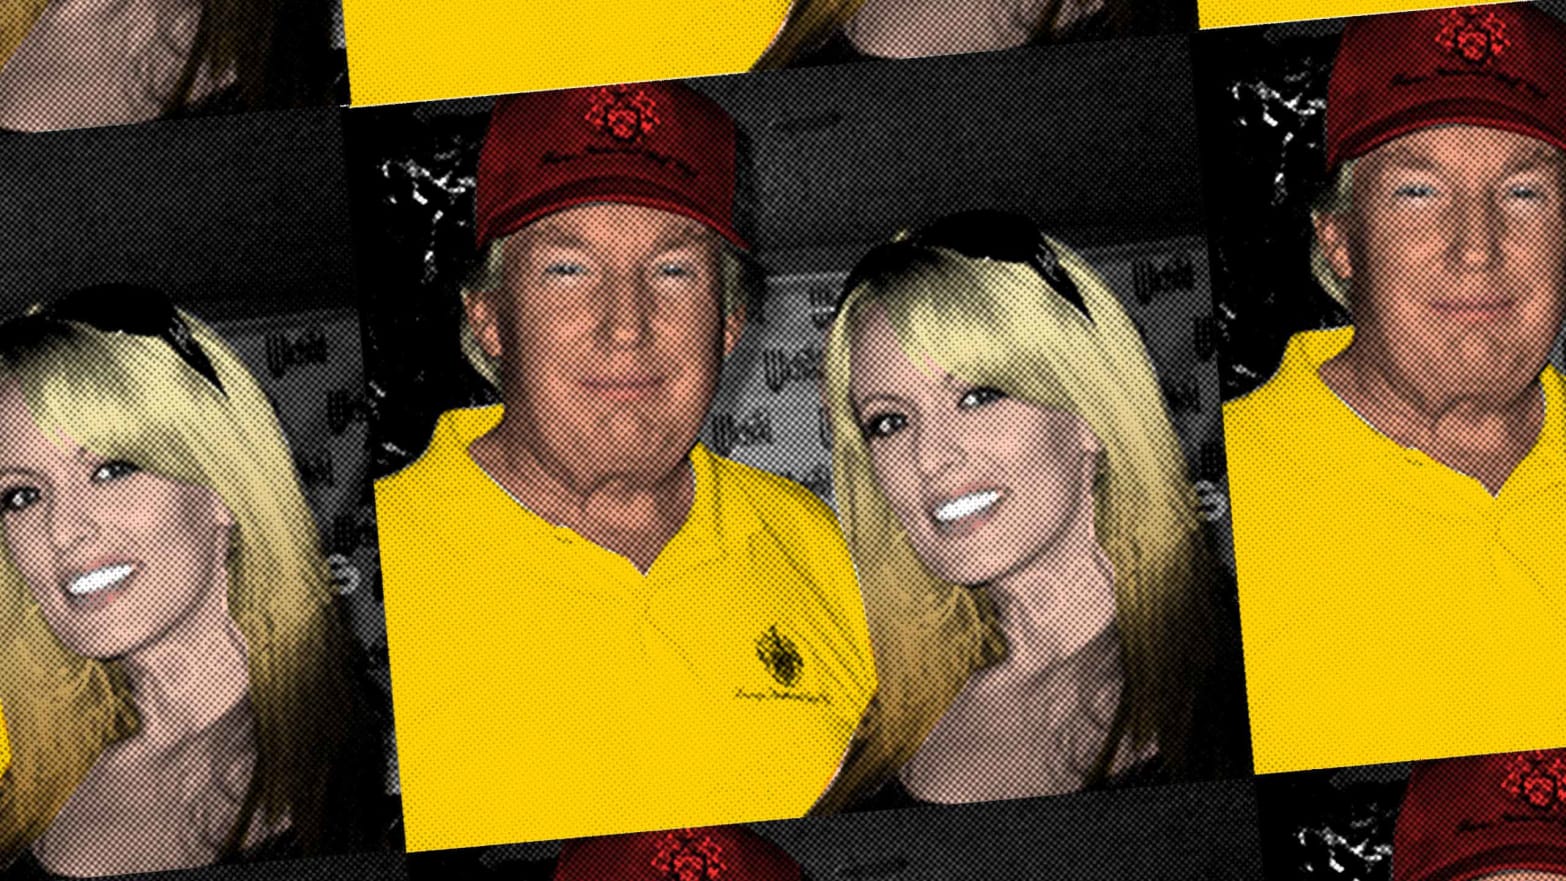 Youngest Porn Stars Naked - Porn Star: Donald Trump and Stormy Daniels Invited Me to ...